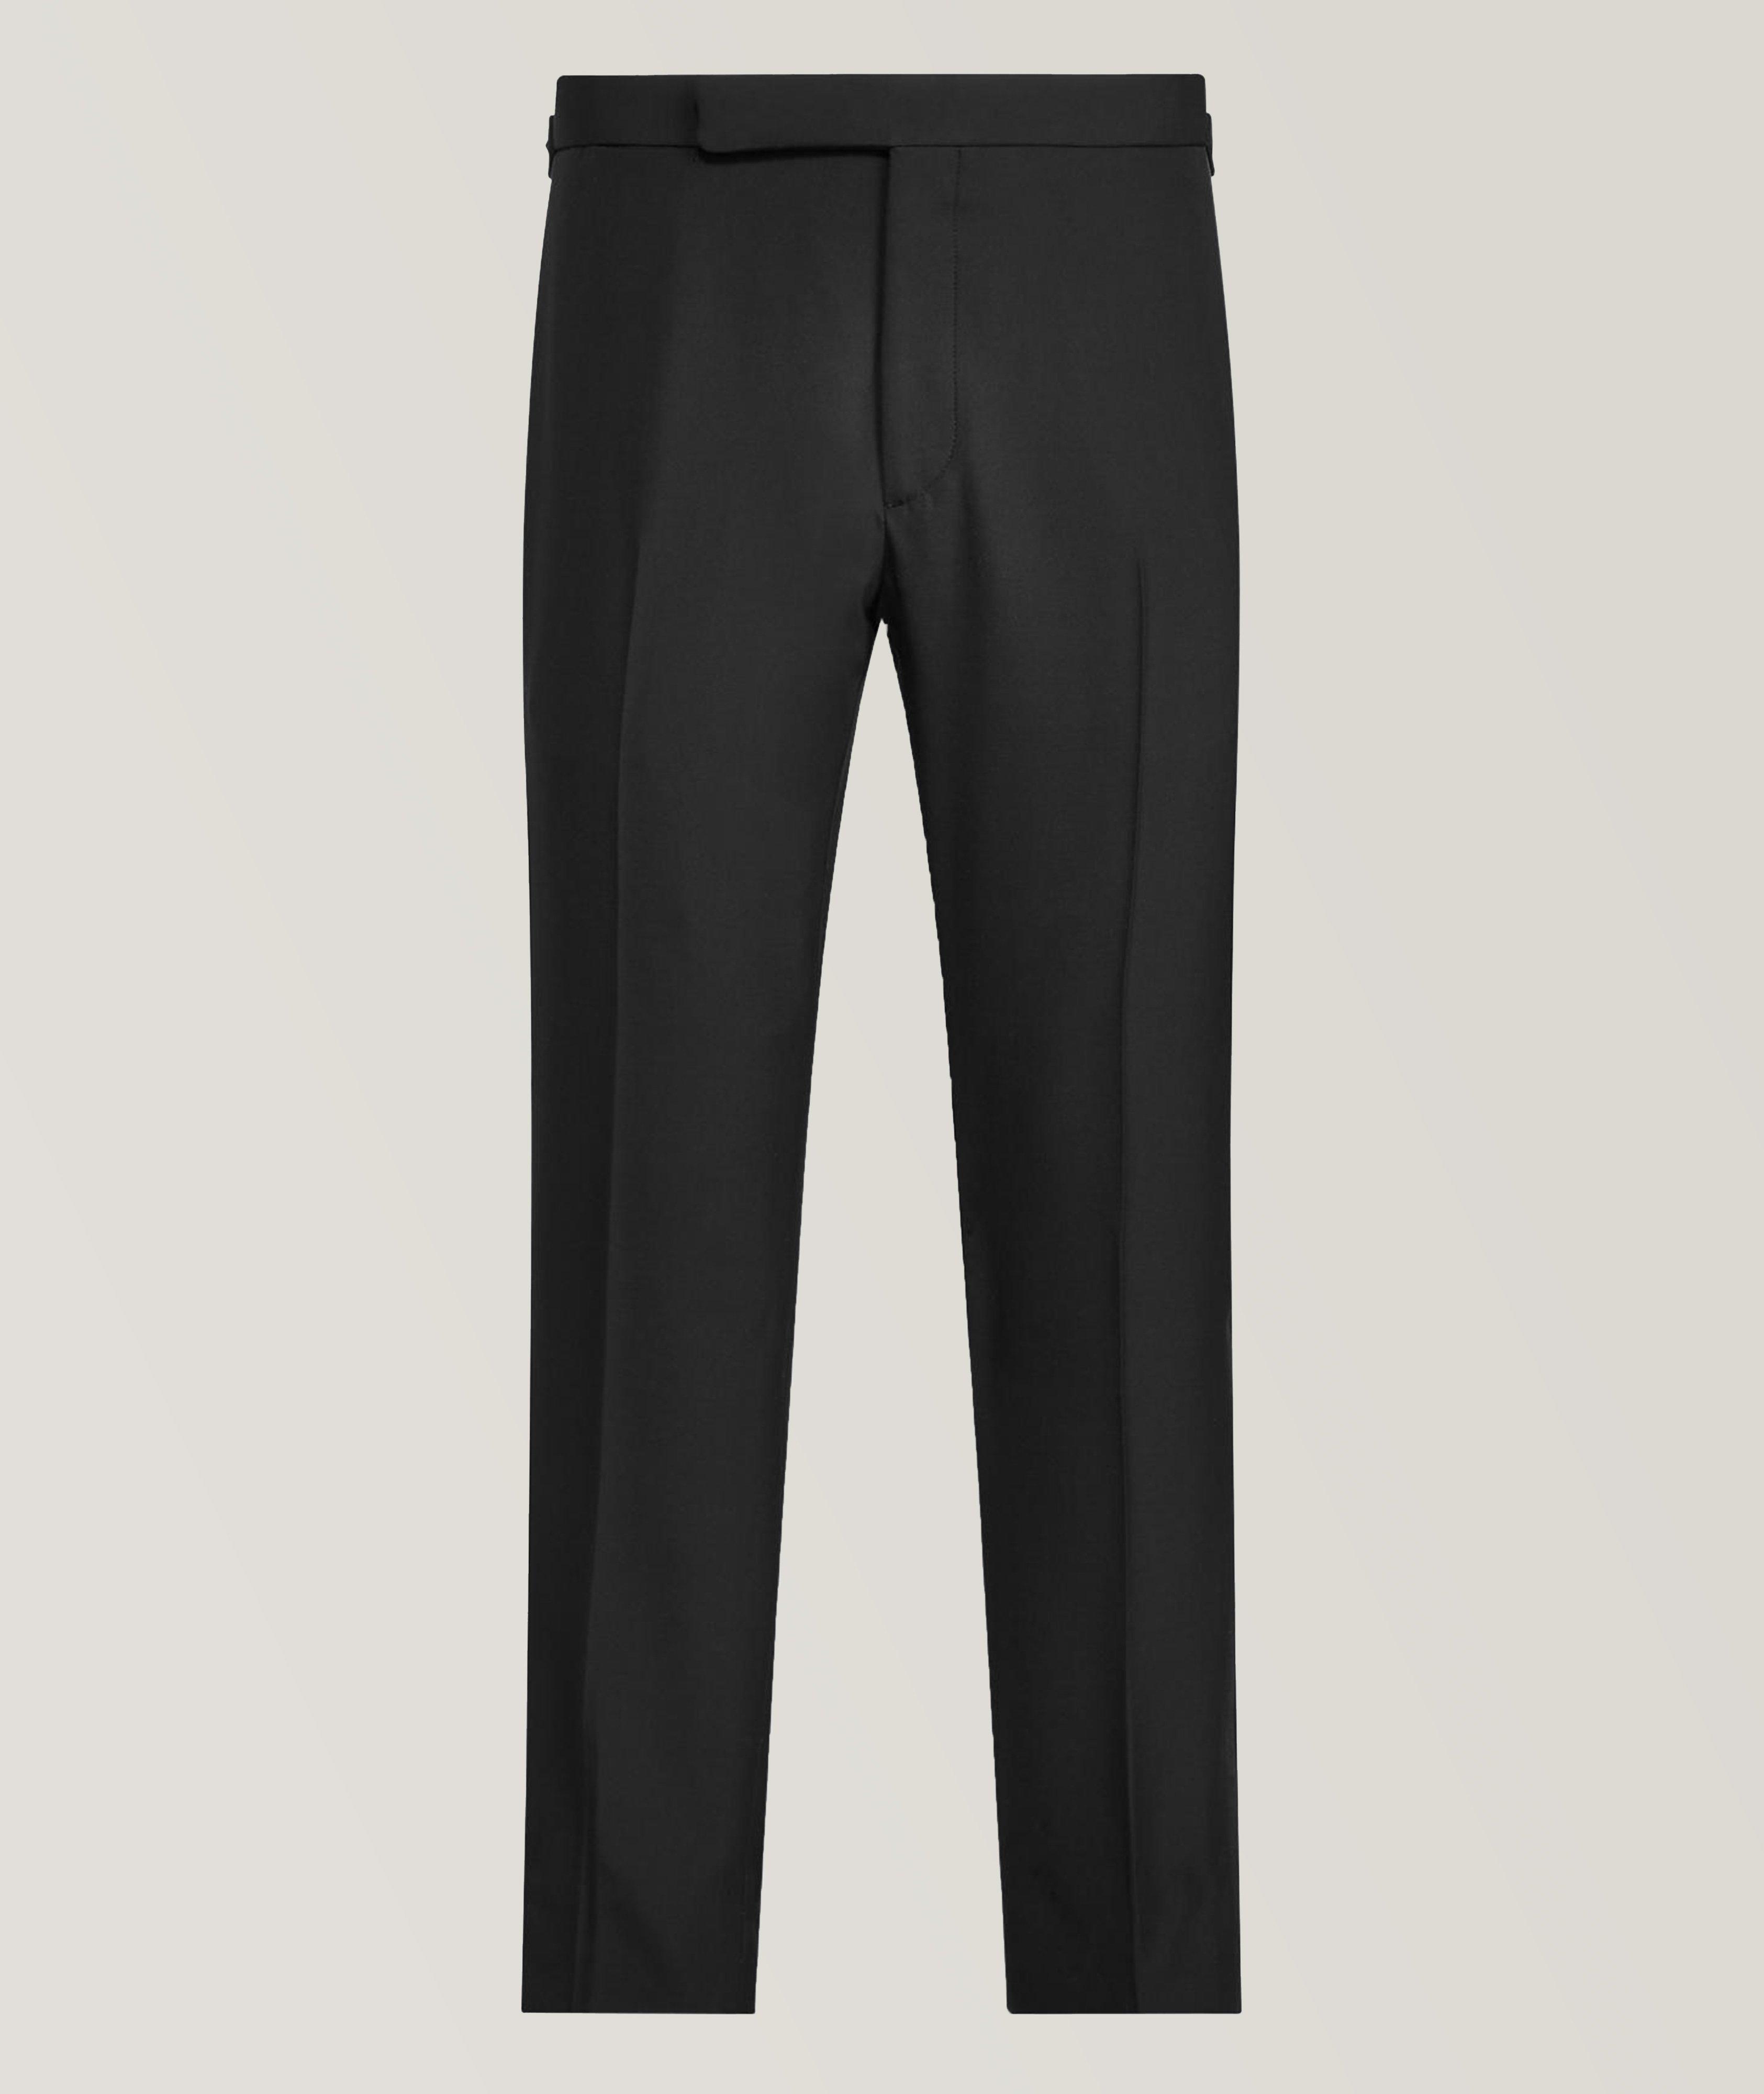 Gregory Hand-Tailored Tuxedo Trousers